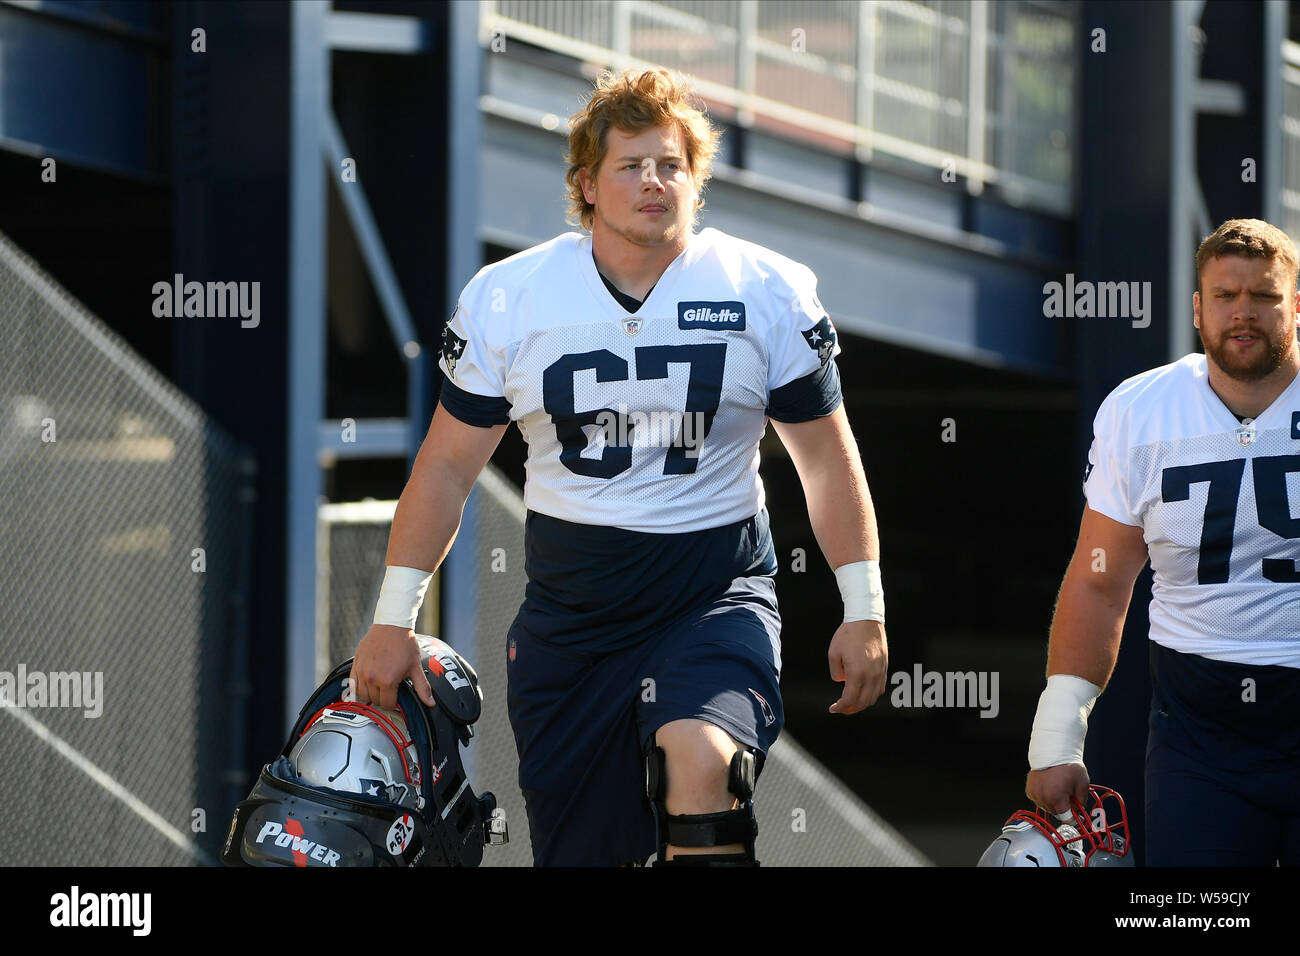 Foxborough, Massachusetts, USA. 26th July, 2019. New England Patriots offensive lineman Tyler Gauthier (67) at the New England Patriots training camp held on the practice fields at Gillette Stadium, in Foxborough, Massachusetts. Eric Canha/CSM/Alamy Live News Stock Photo